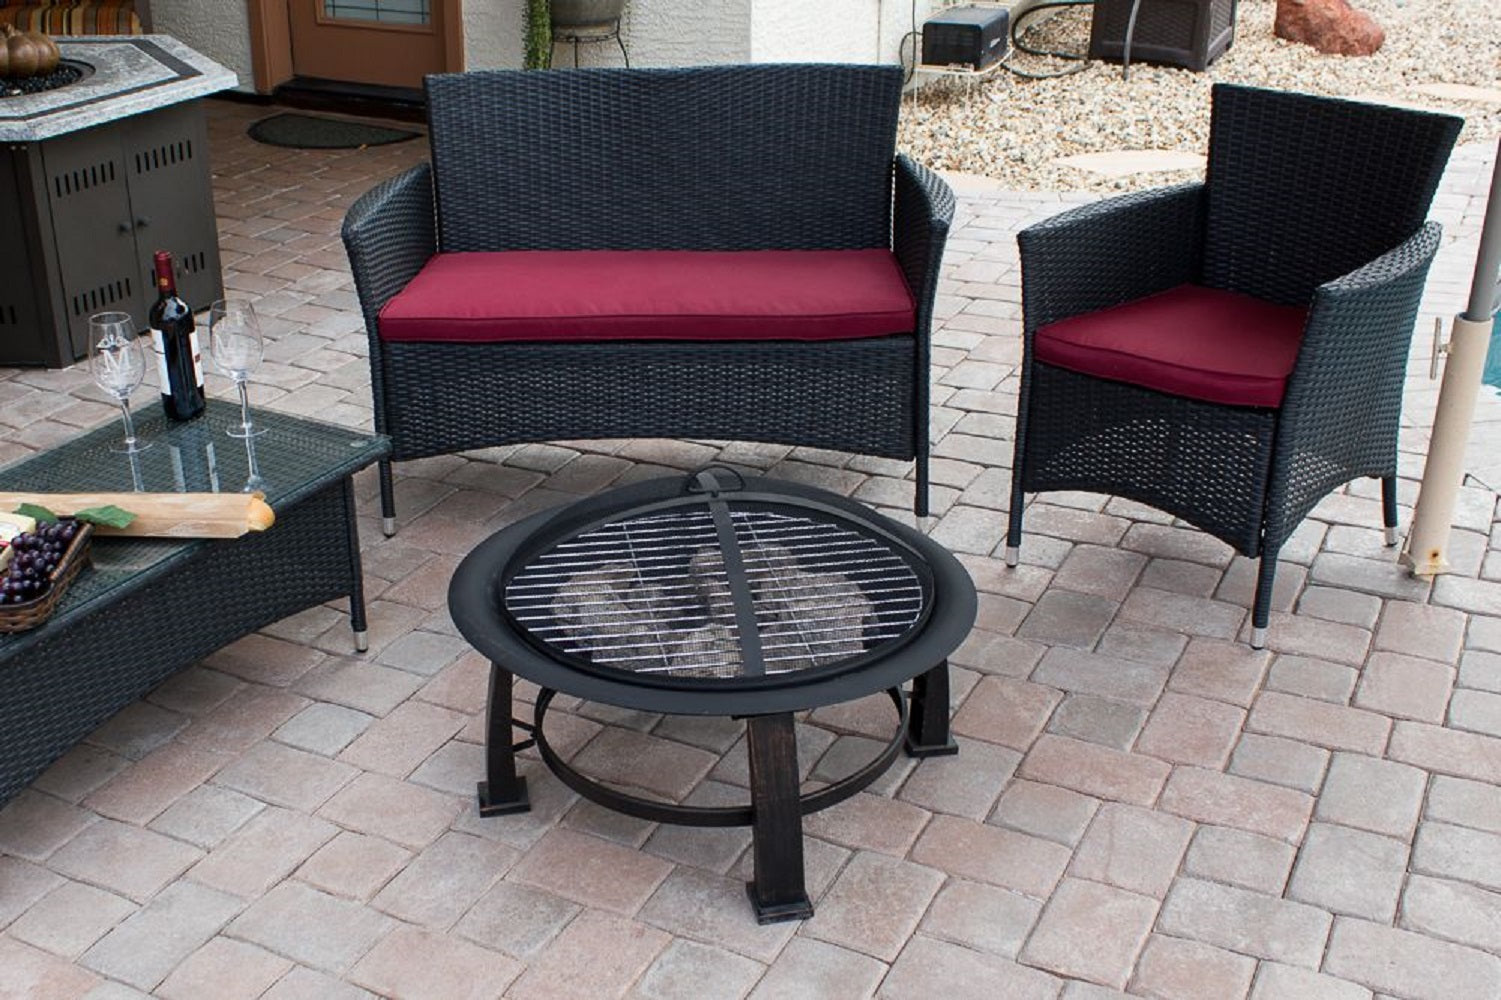 Hiland 30" Wood Burning Firepit with Cooking Grate-FT-235- Lifestyle Patio